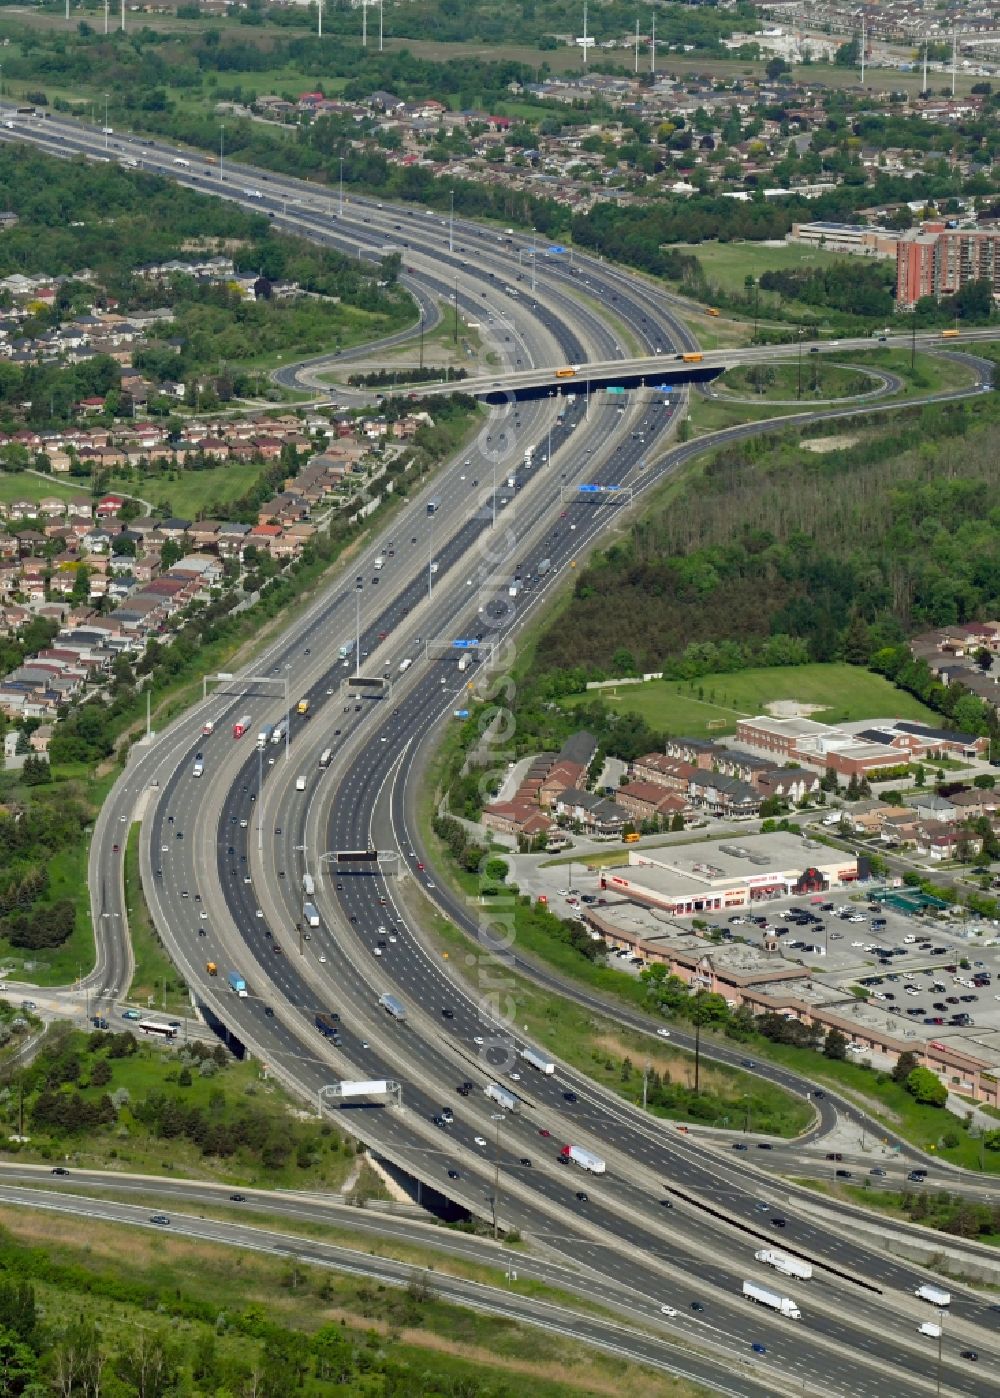 Toronto from above - Highway route of Ontario 401 Expressway in in Toronto in Ontario, Canada